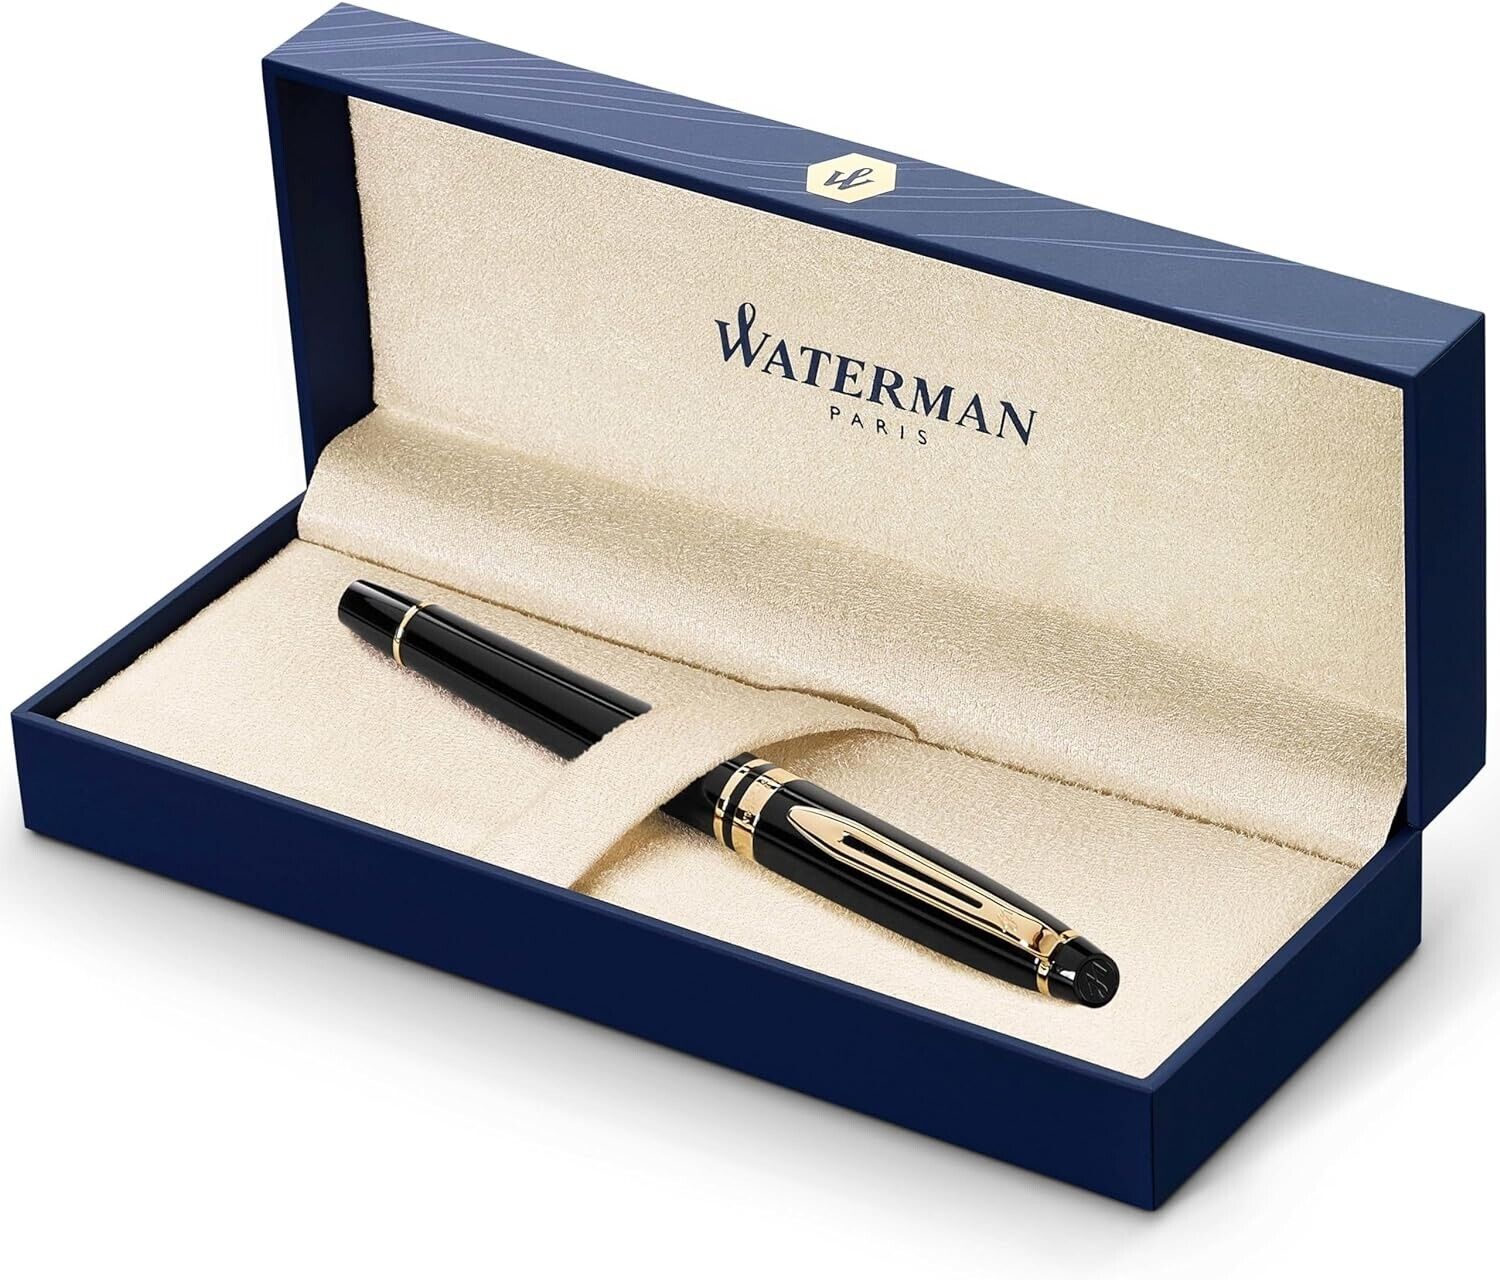 Waterman Expert Fountain Pen, Gloss Black With 23k Gold Trim and Gift Box (Fine)